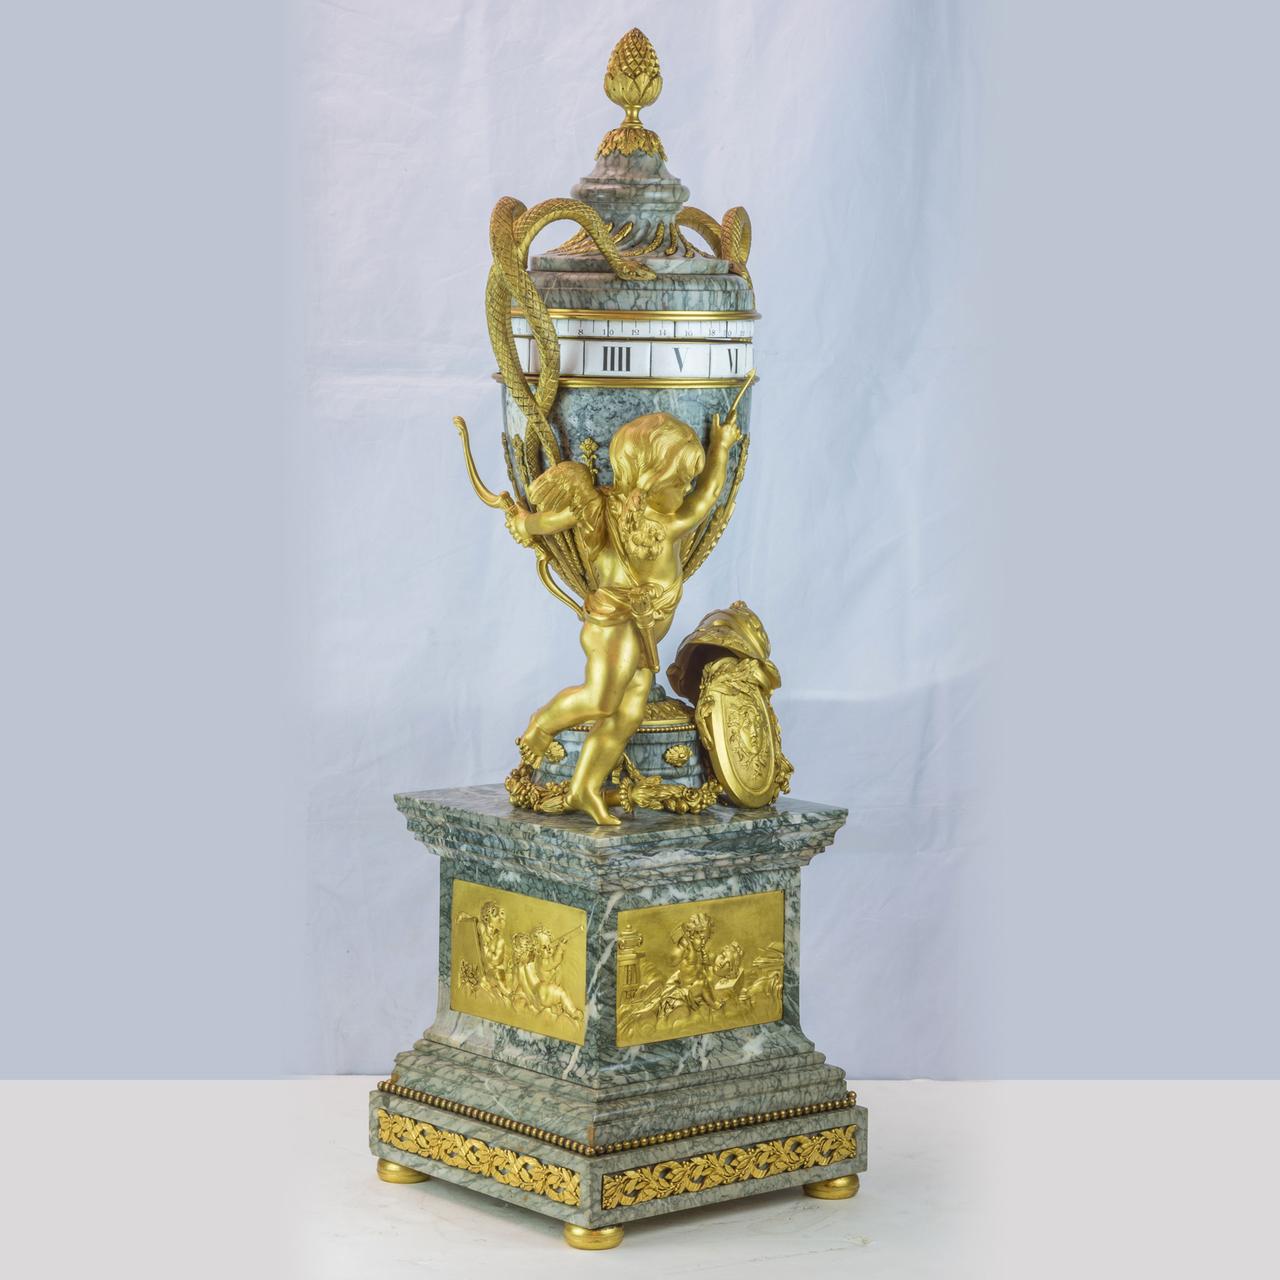 A Monumental Ormolu Mounted and Verde Antico marble rotary mantel clock in the manner of Jean-André and Jean-baptiste Lepaute

A fine large Louis XVI style gilt bronze mounted and verde antico marble rotary mantel clock in the manner of Jean-André